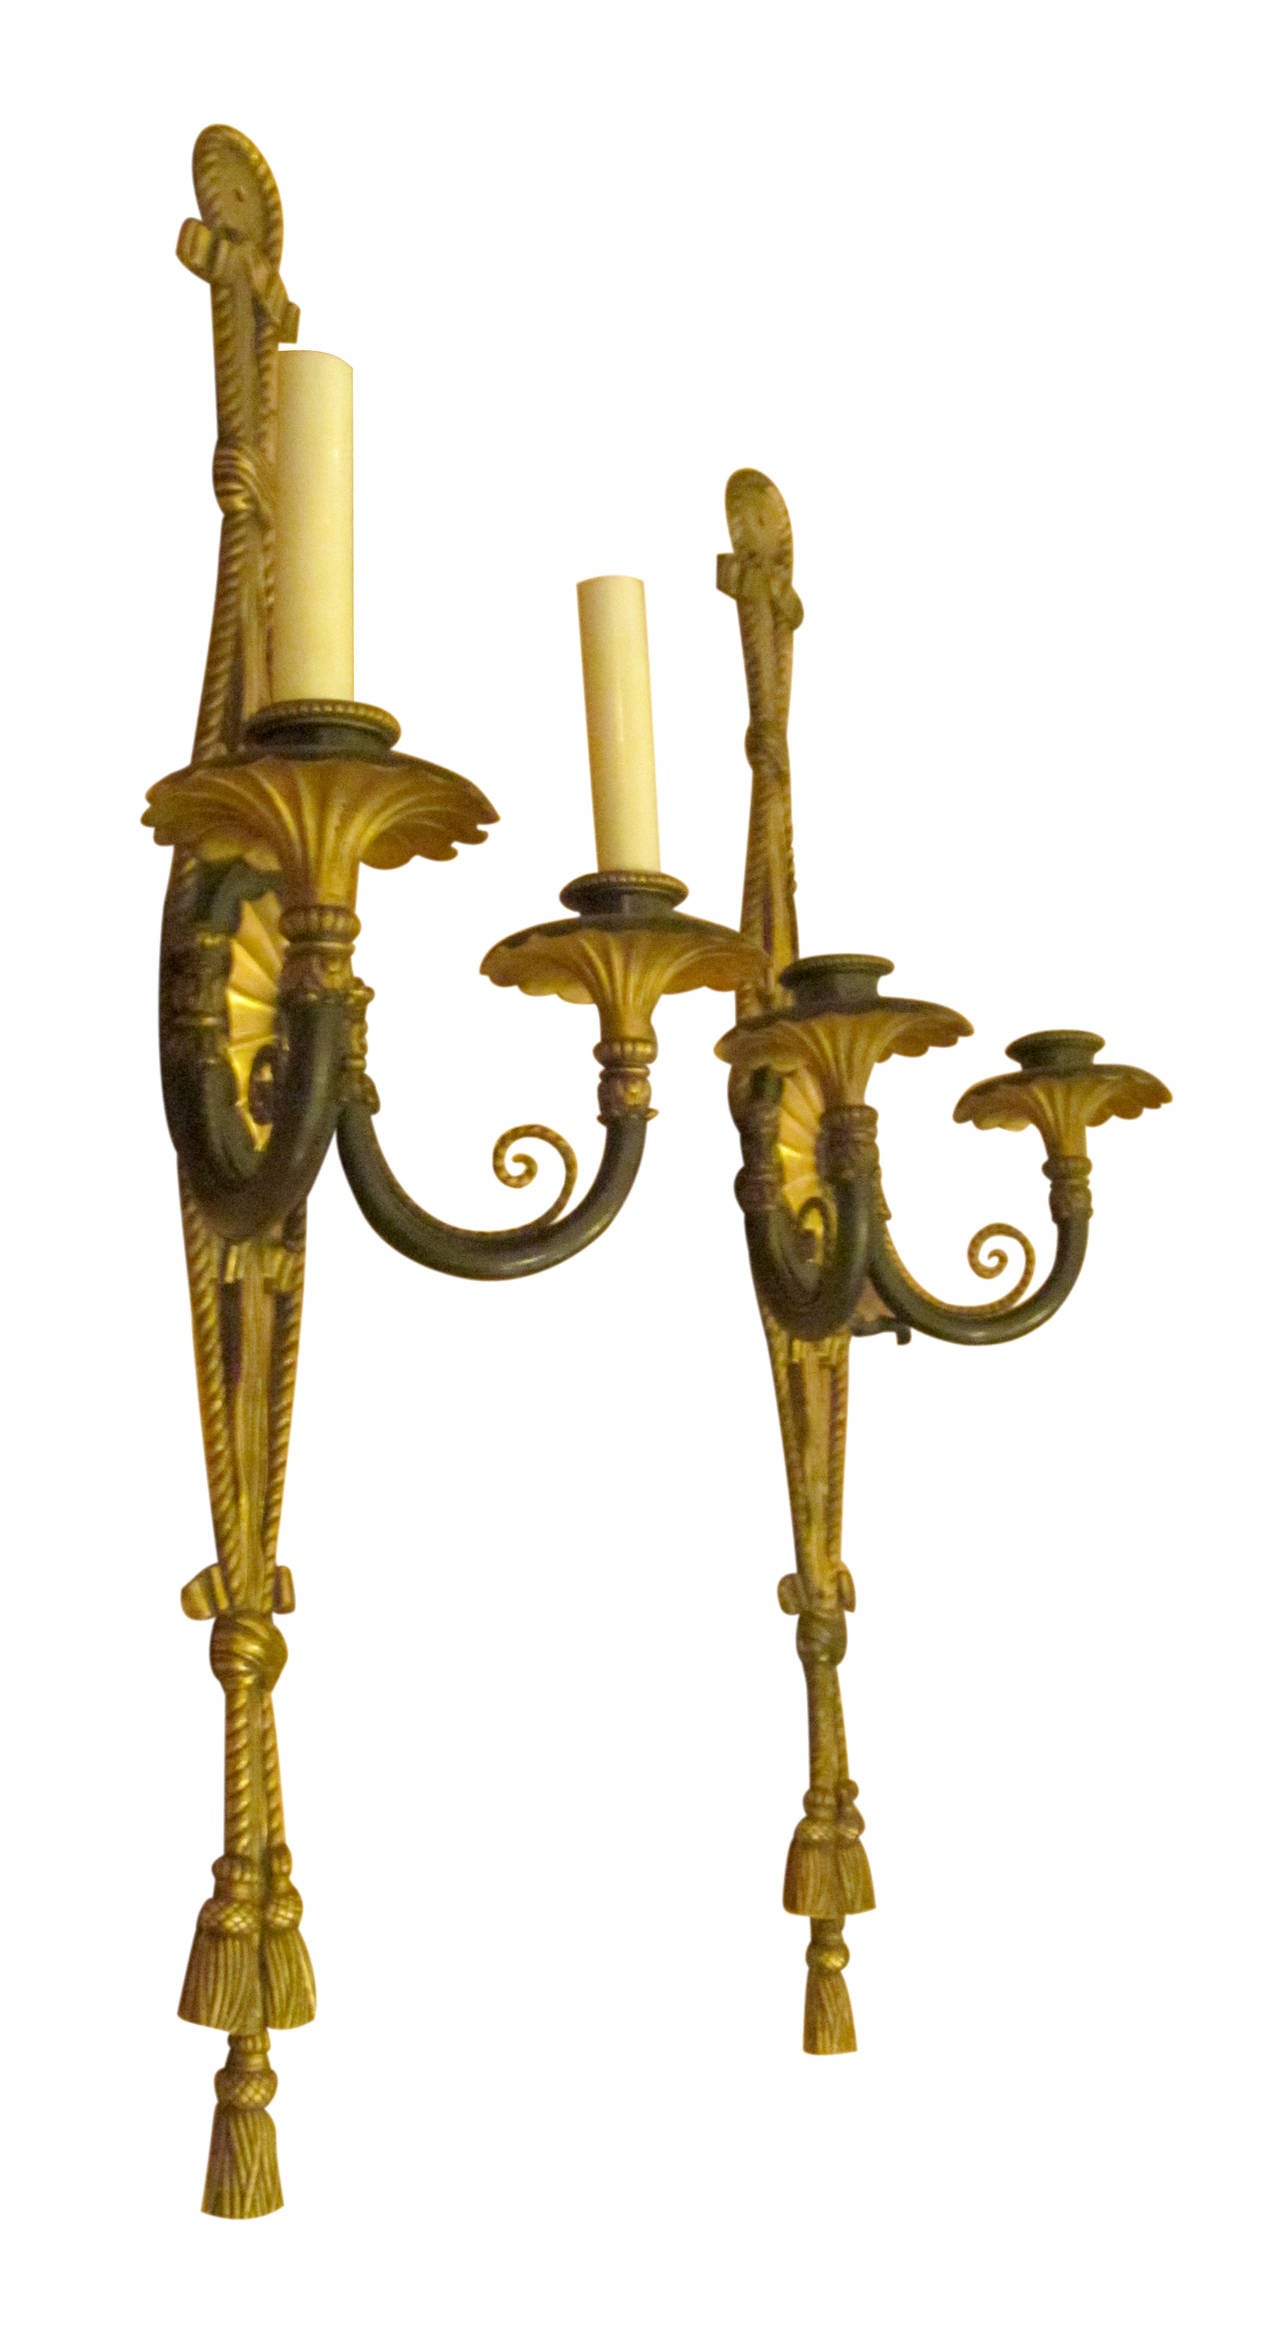 Early 20th Century Pair of Caldwell Bronze Sconces with Triple Tassels and Center Spider Web, 1920s